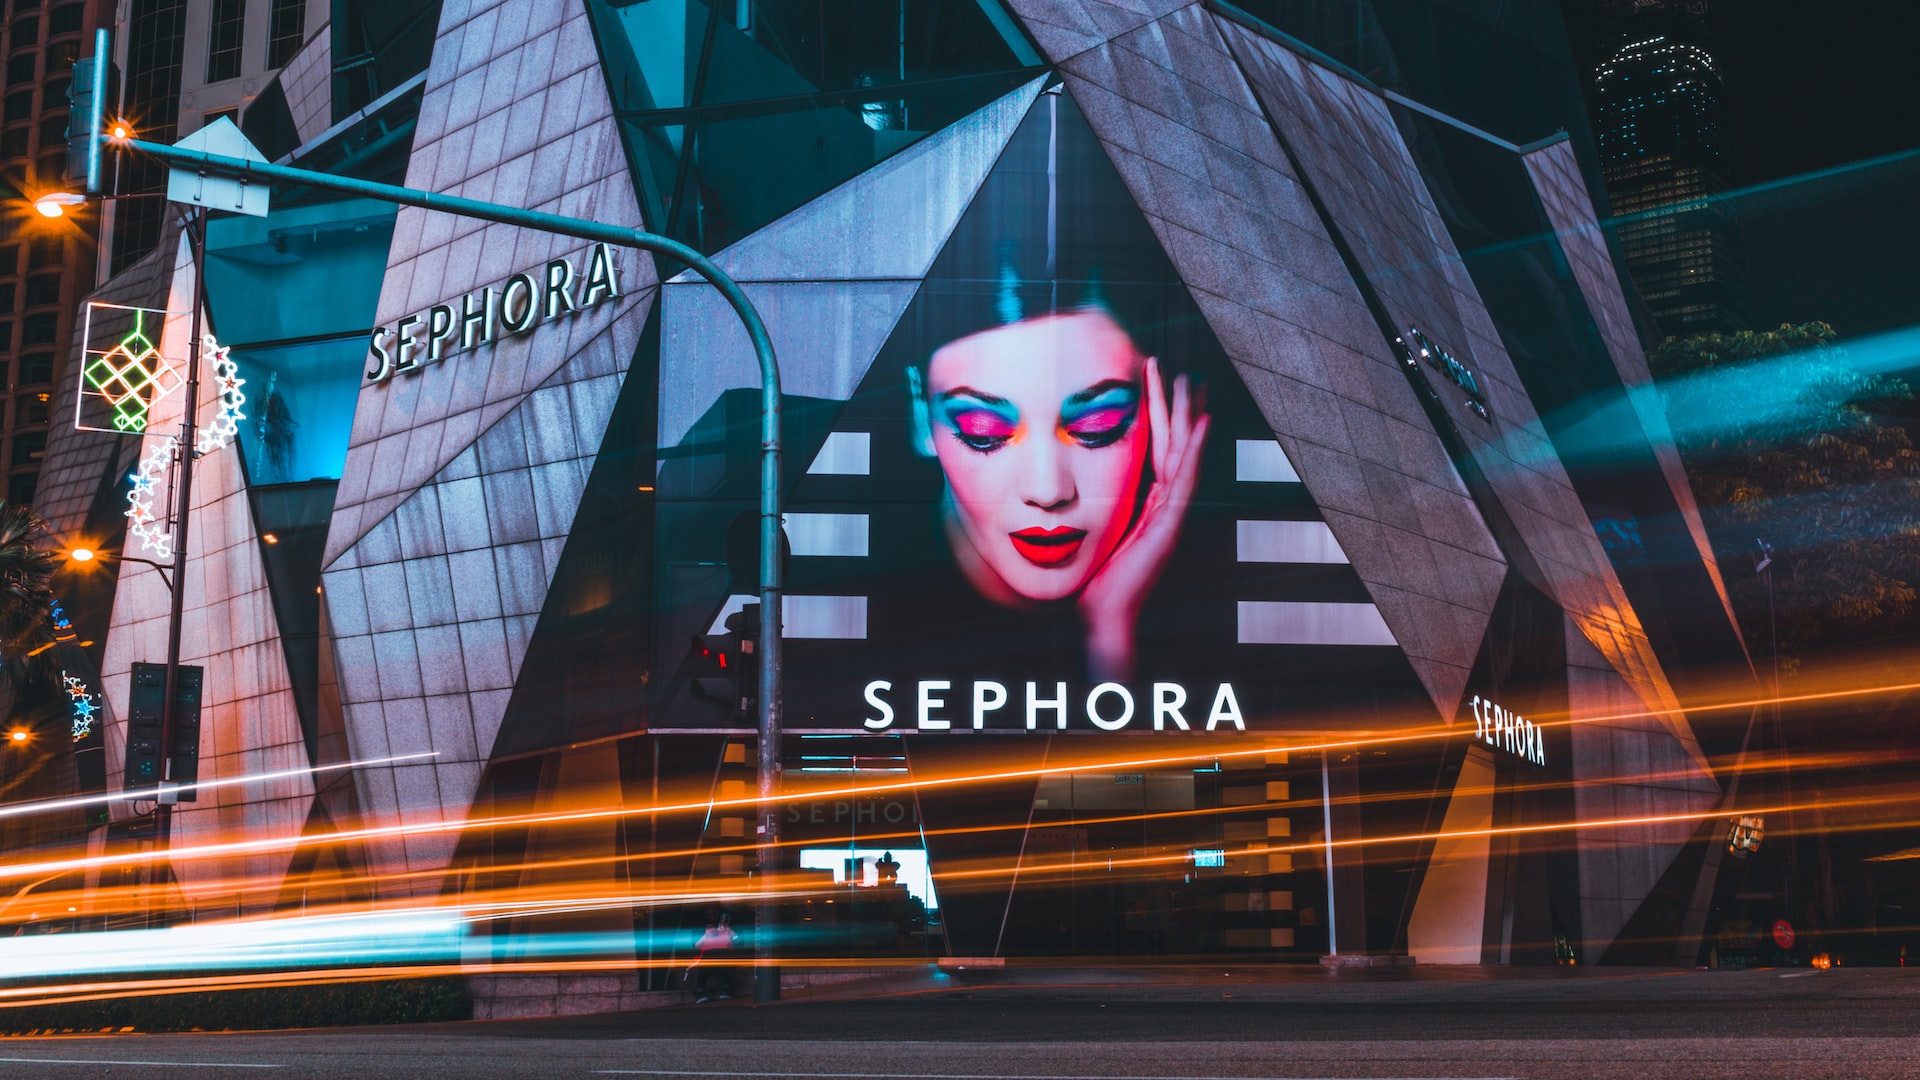 Image of a Sephora store